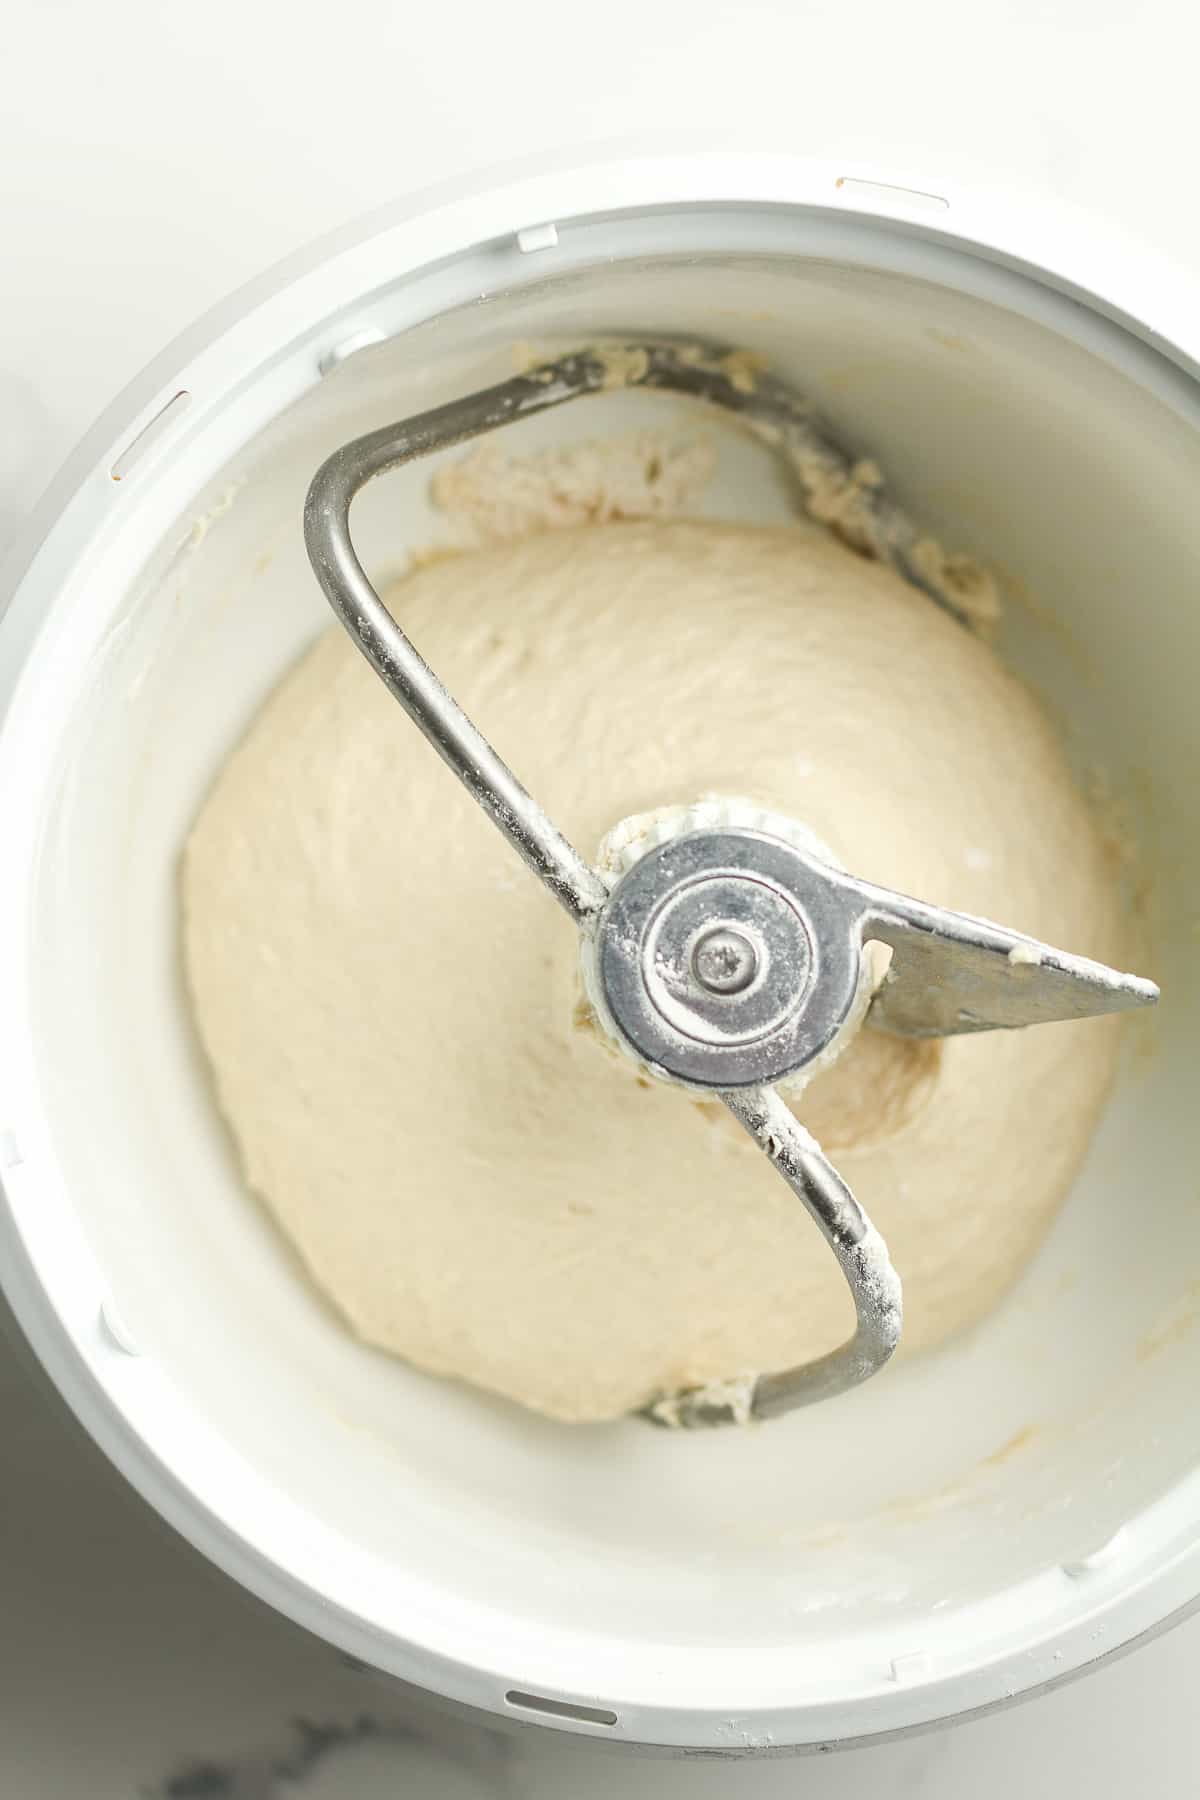 A mixer with the just made bread dough.